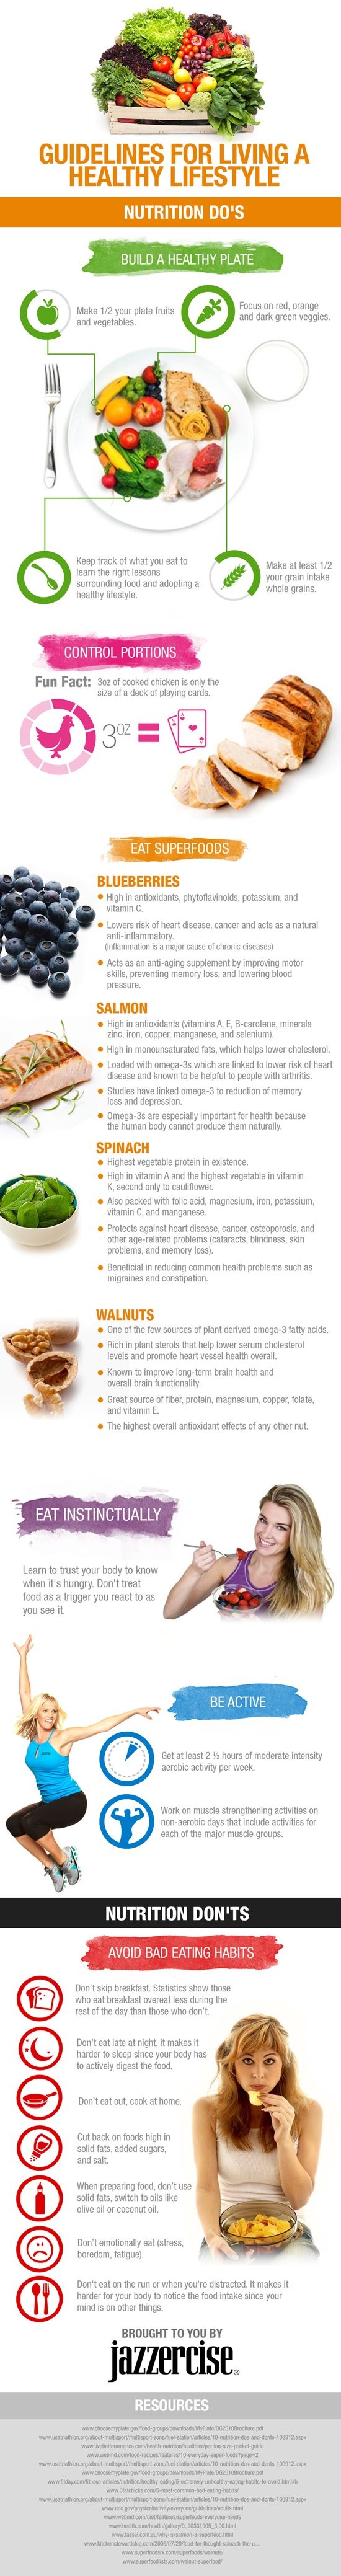 19 Tips When Eating Nutrition Infographic